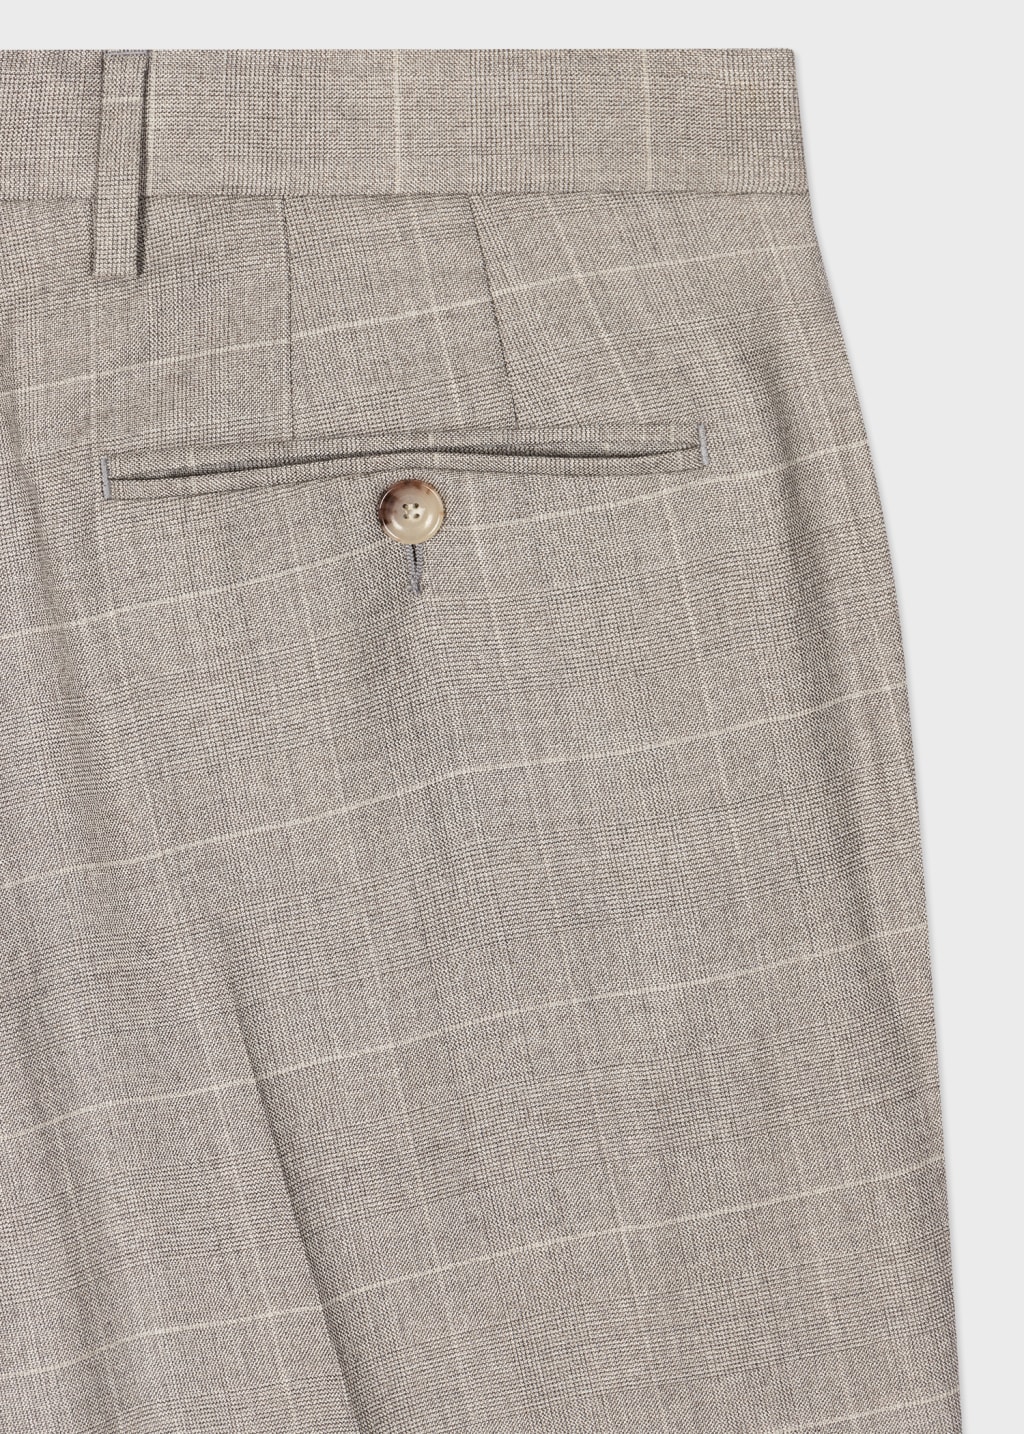 Product View - Tailored-Fit Grey Multi-Check Wool Buggy-Lined Suit by Paul Smith